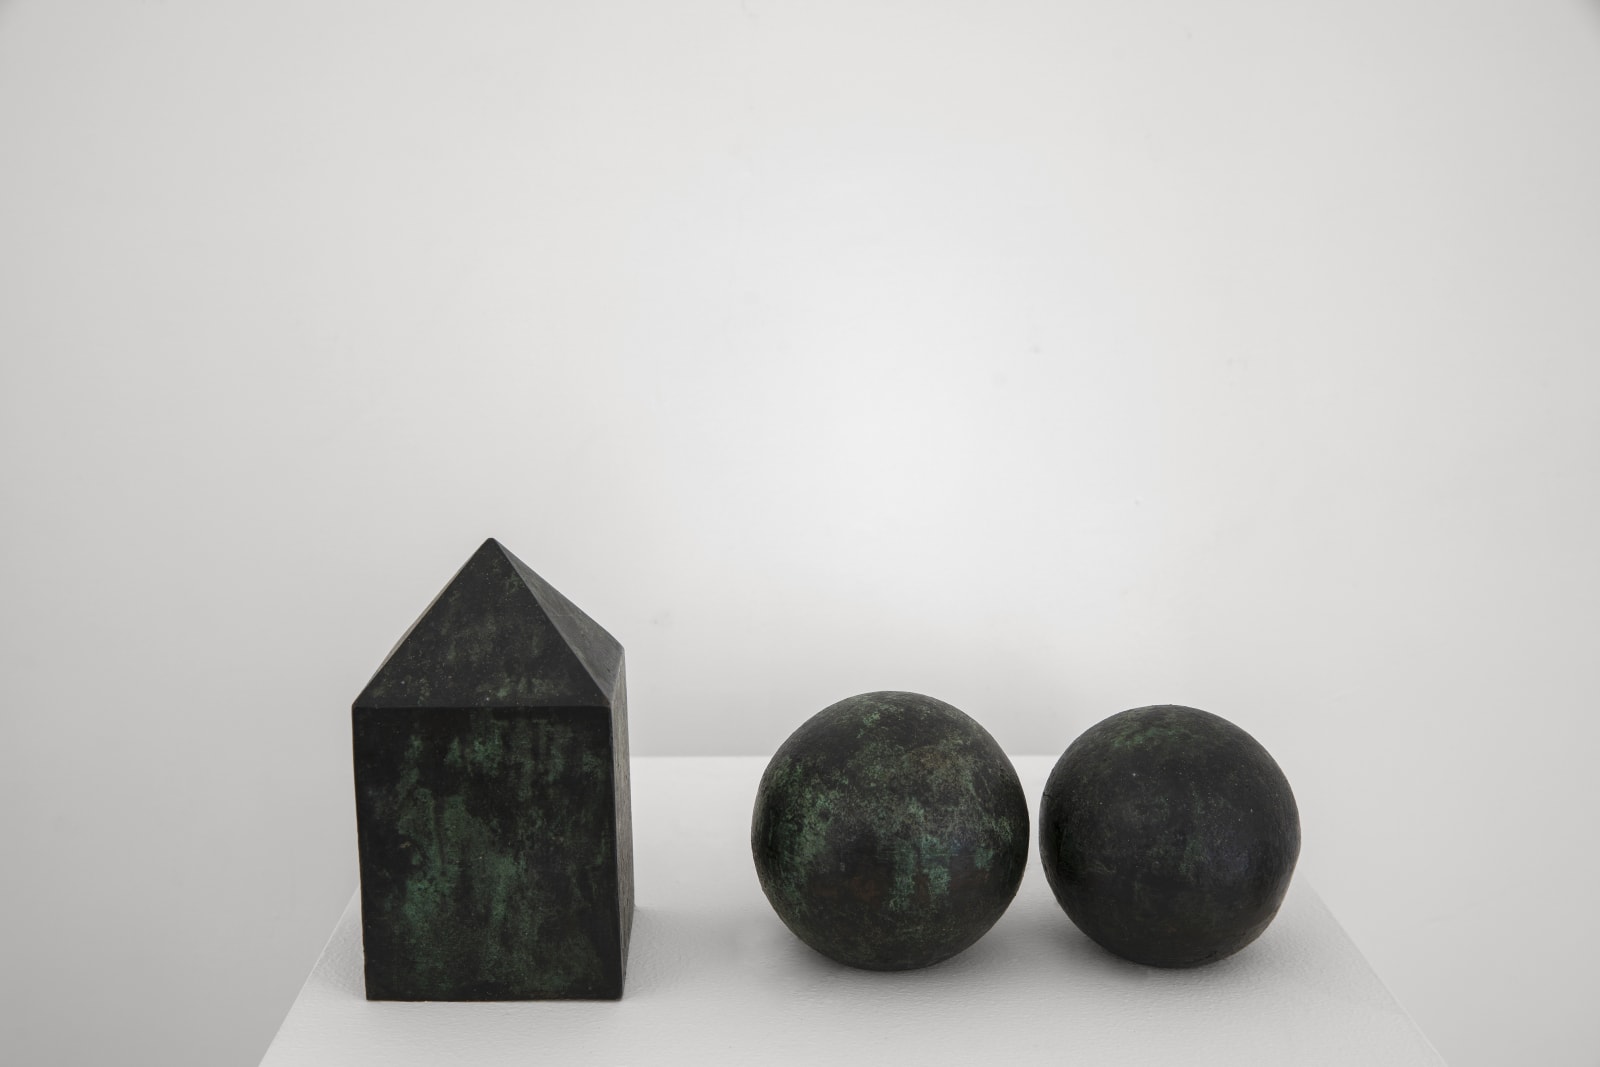 Two Balls With Obelisk, 1963-85 bronze 10.5 x 25 x 8.5 cm. 4 13/100 x 9 42/50 x 3 7/20 in.